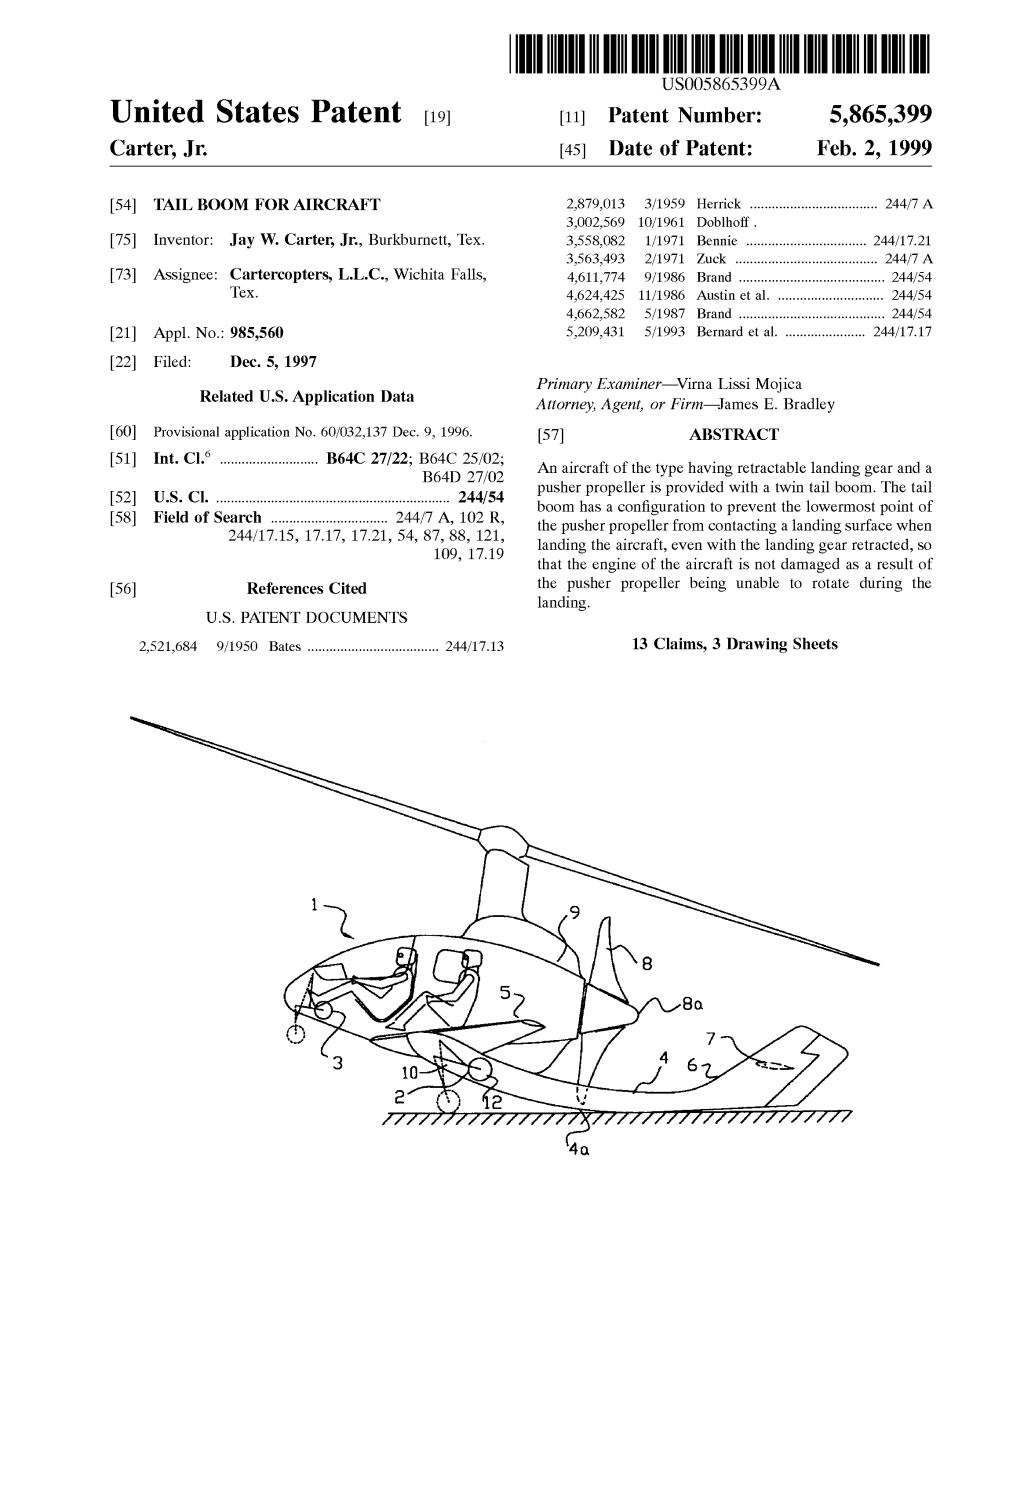 United States Patent (19) 11 Patent Number: 5,865,399 Carter, Jr